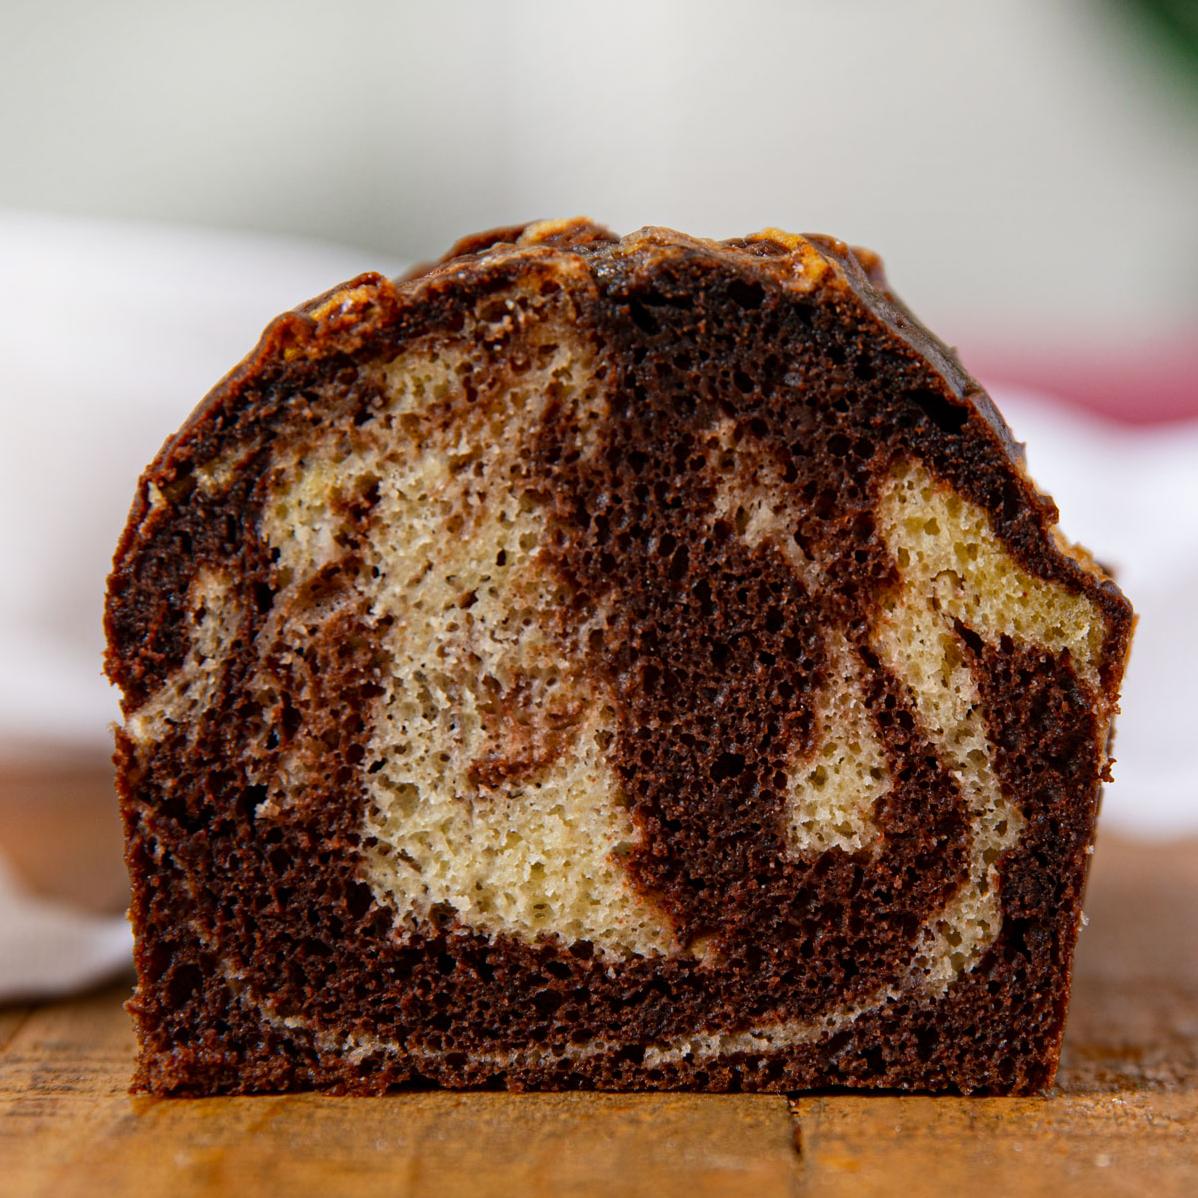  Get ready to drool over this delicious chocolate swirl marble pound cake!